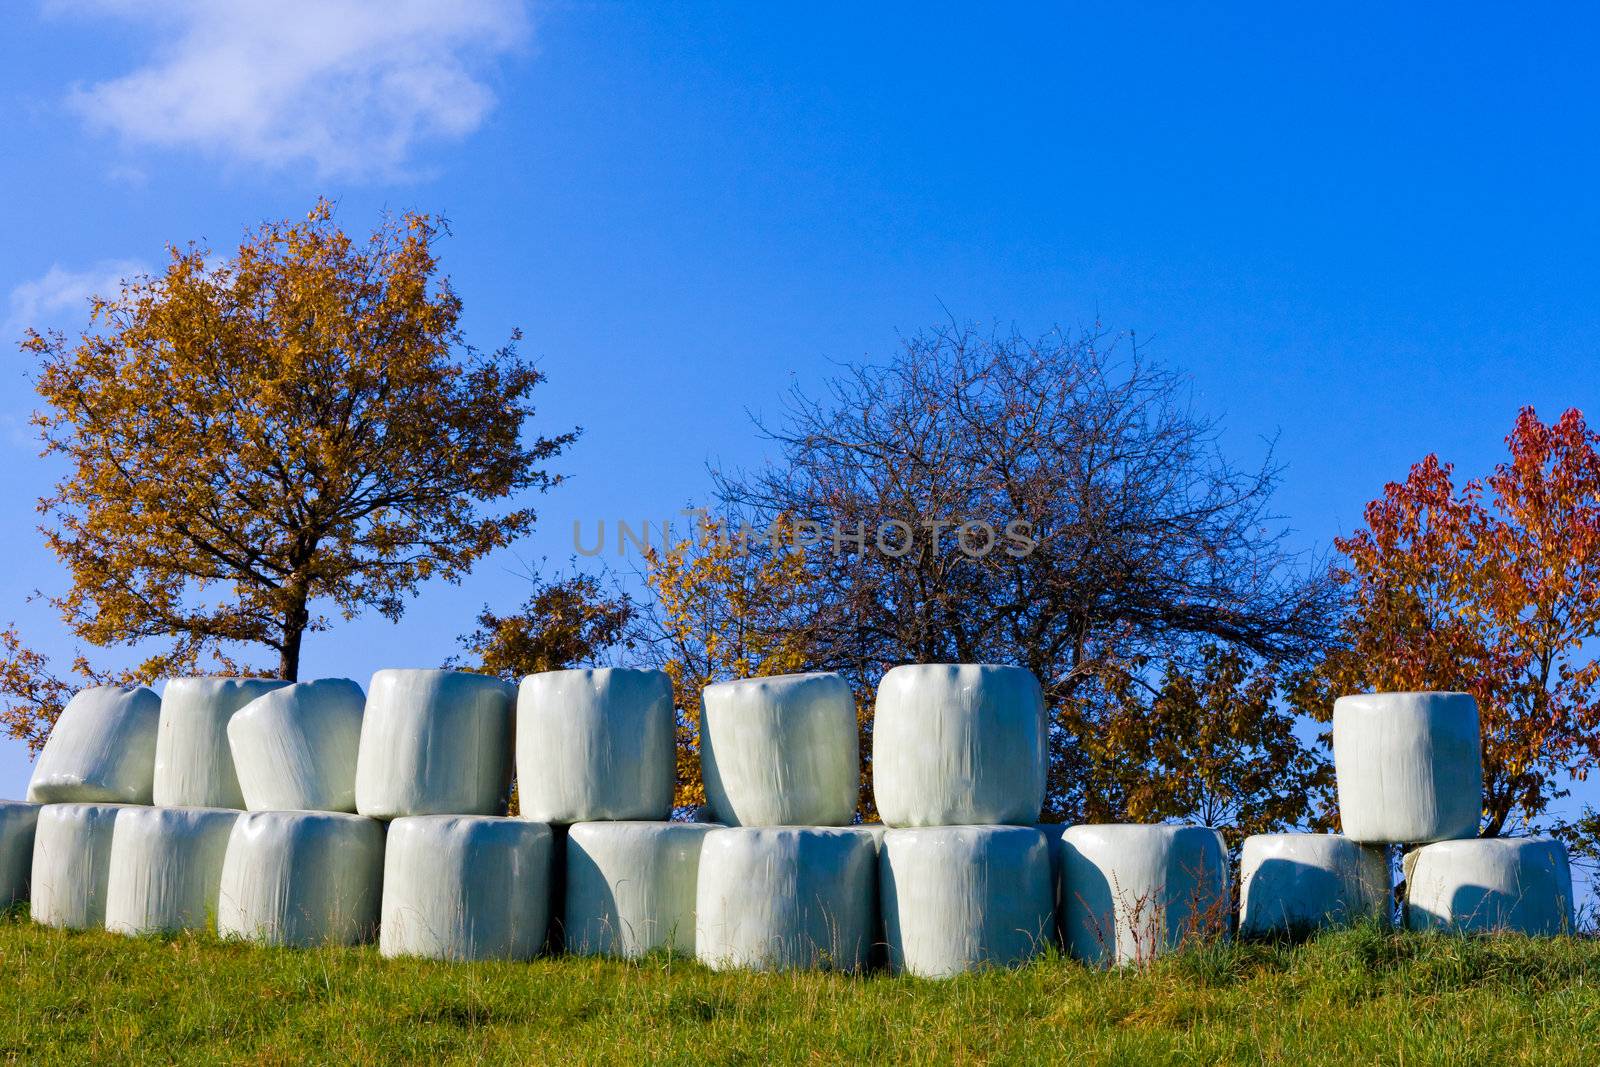 Silage (or Haylage): Bales of hay sealed in plastic wrapper for fermentation to feed livestock.